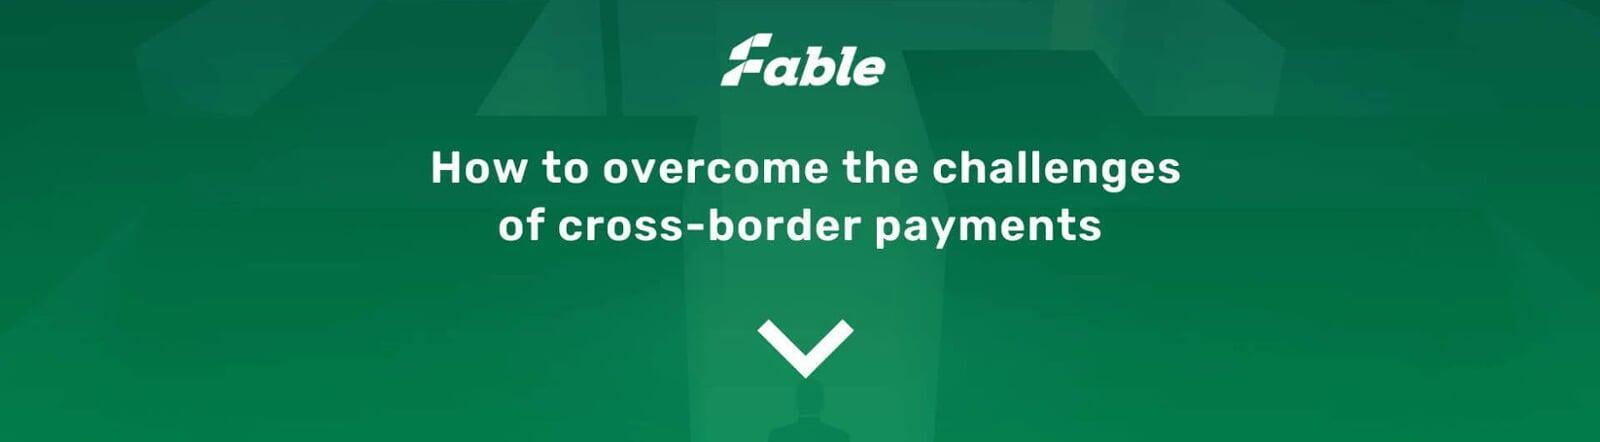 How to Overcome the Challenges of Cross-Border Payments